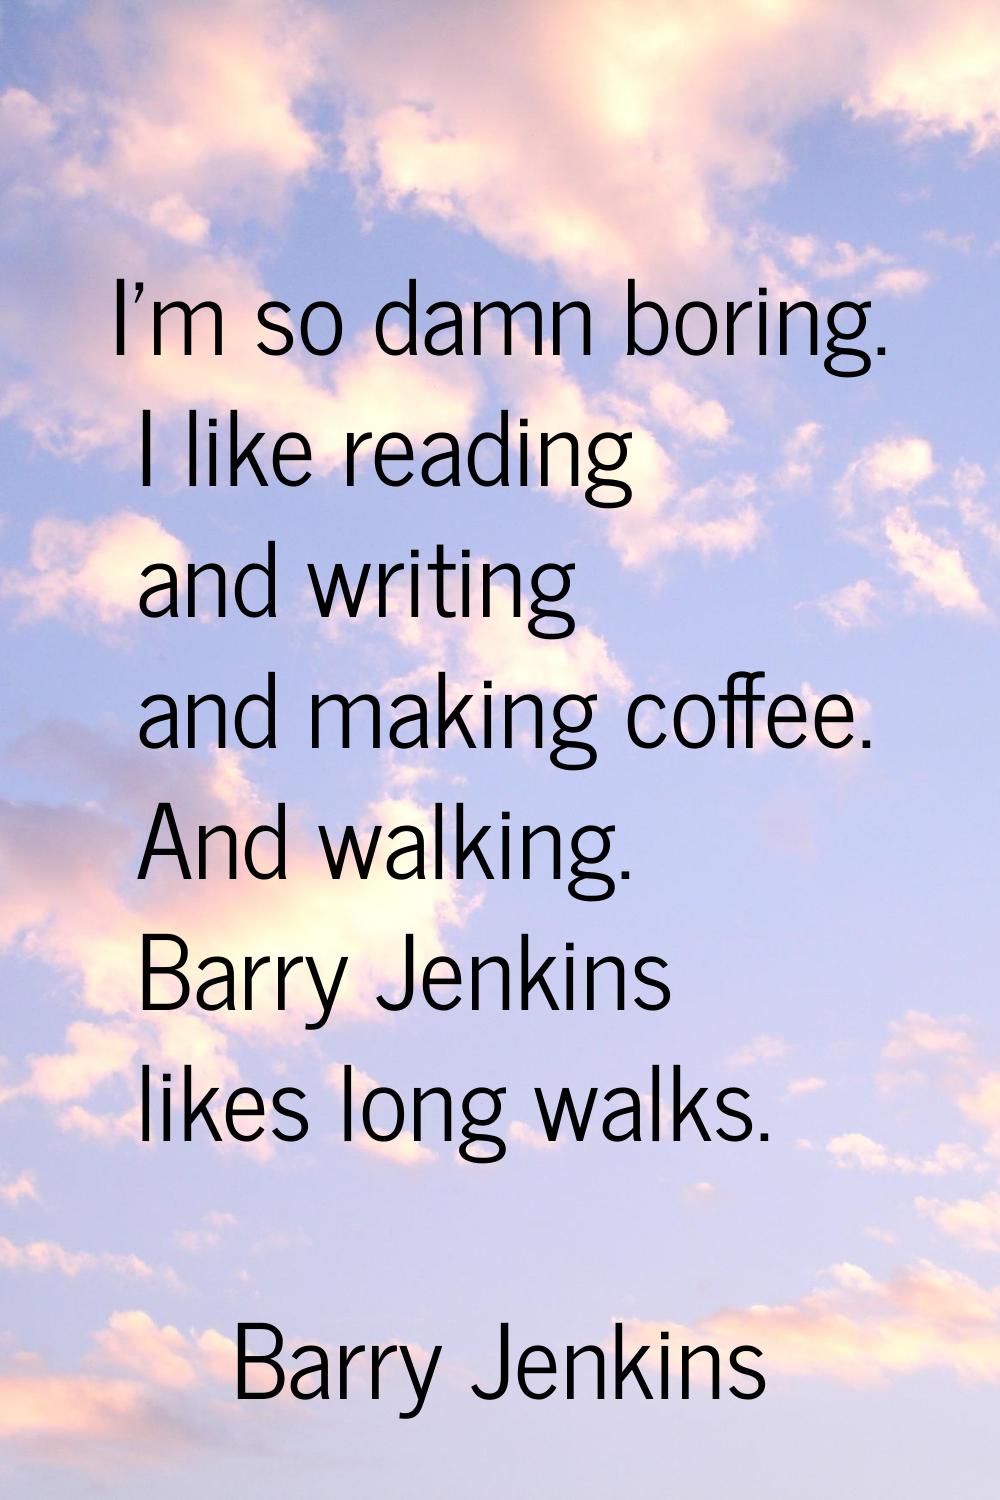 I'm so damn boring. I like reading and writing and making coffee. And walking. Barry Jenkins likes 